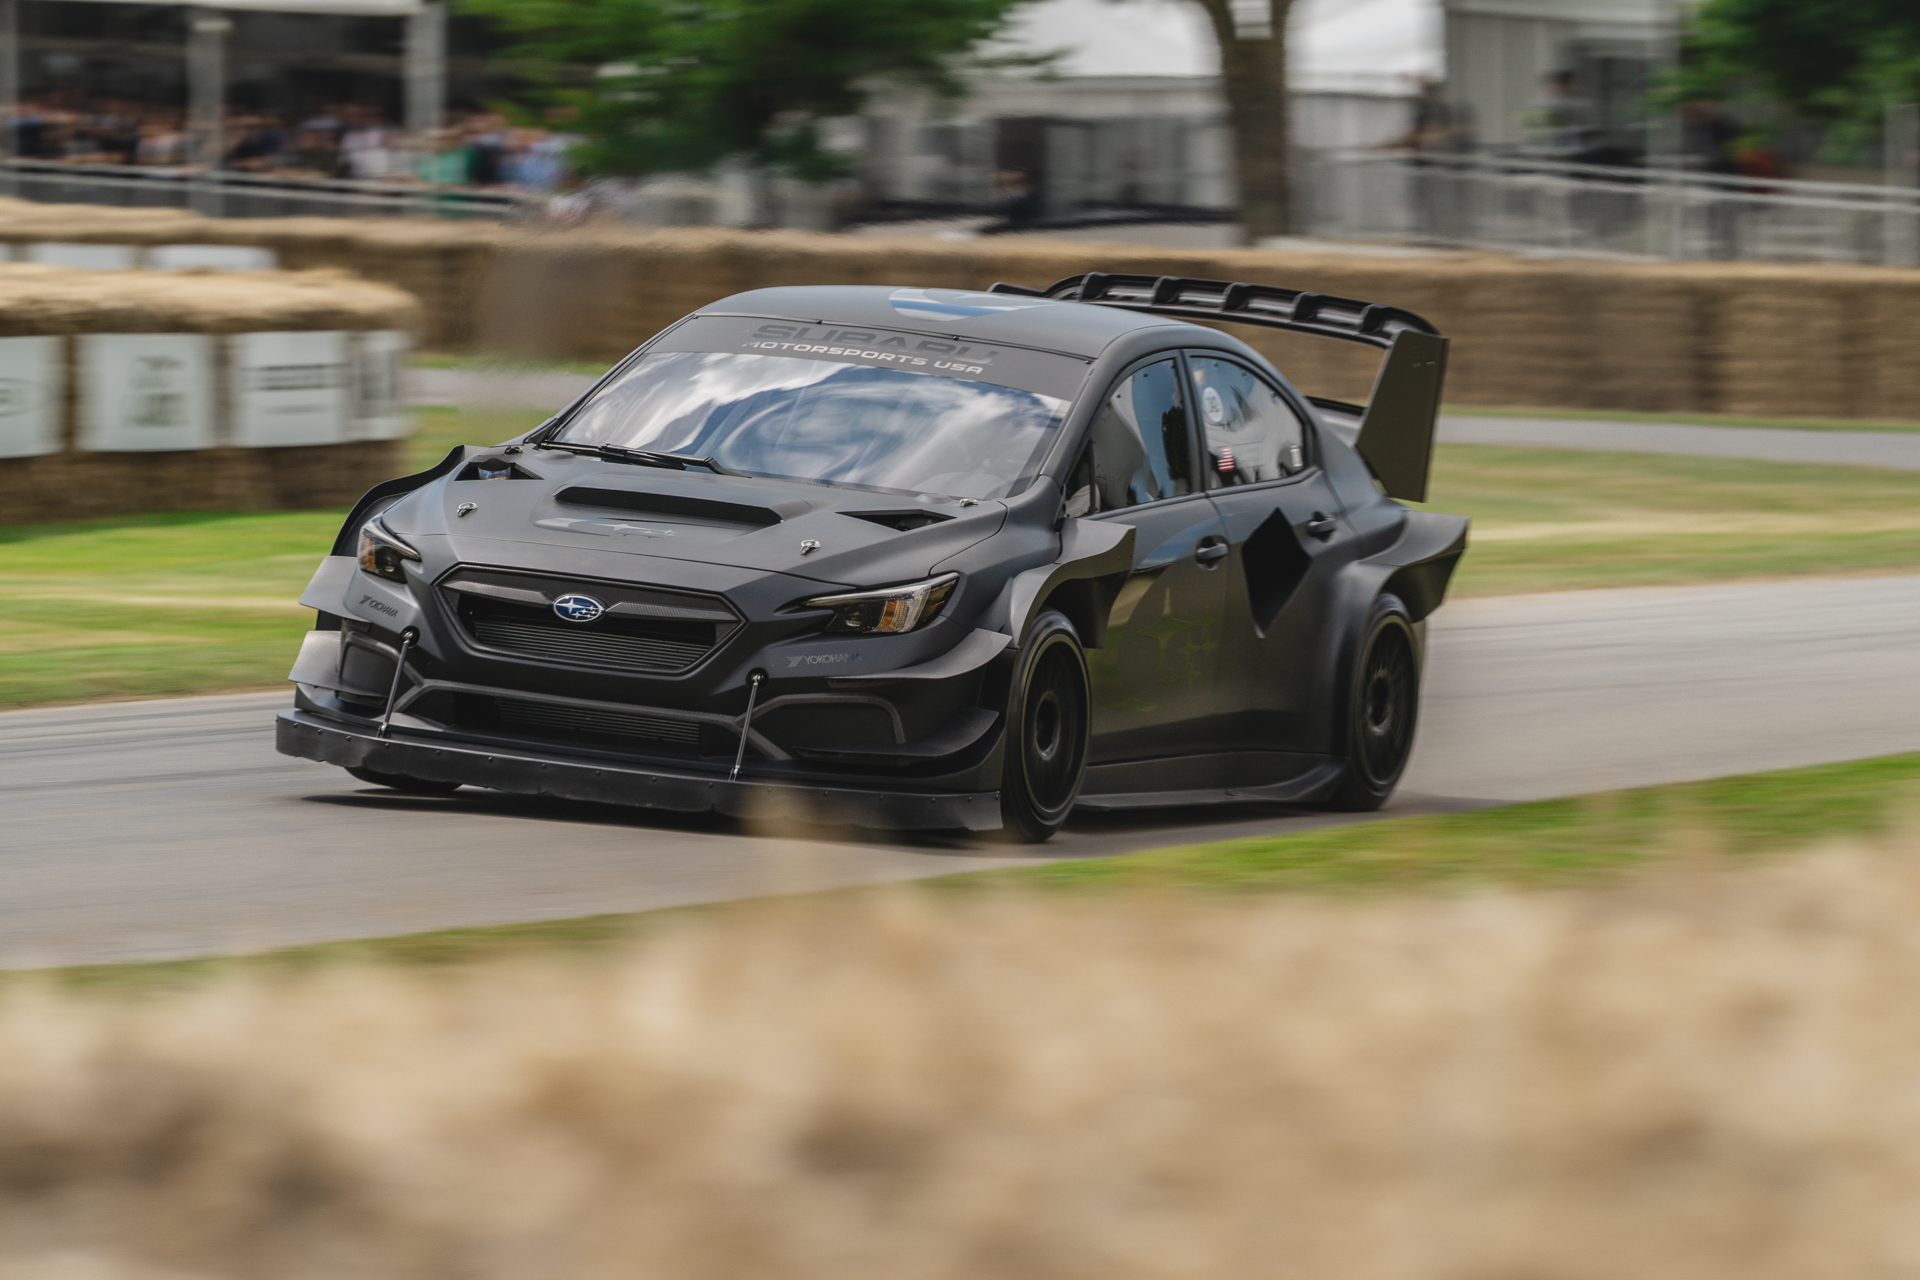 Subaru and Ford Are Unlikely Rivals at Goodwood Free-for-All